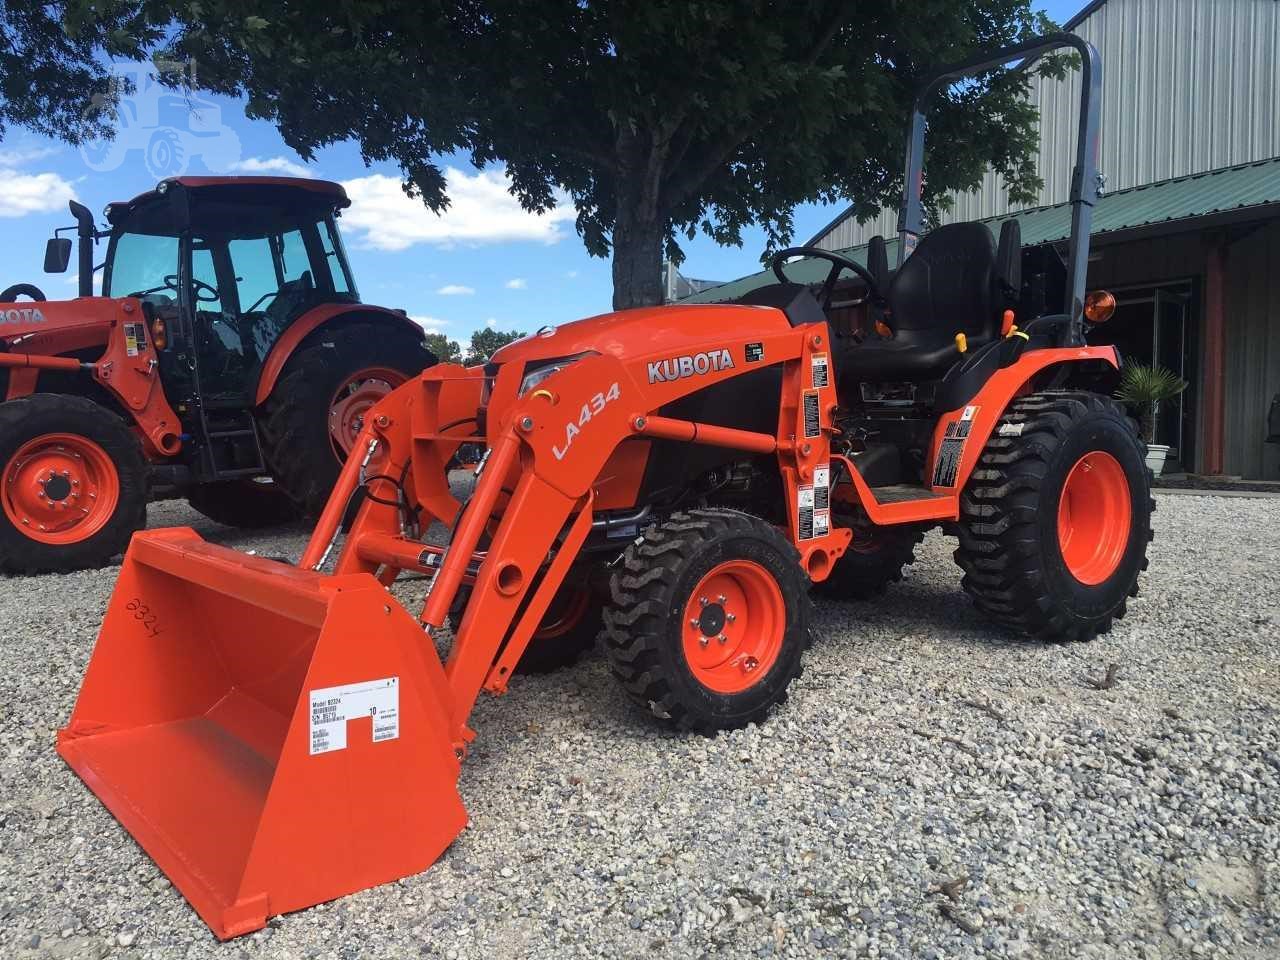 First Choice Kubota Less Than 40 Hp Tractors For Sale - 10 Listings Tractorhousecom - Page 1 Of 1